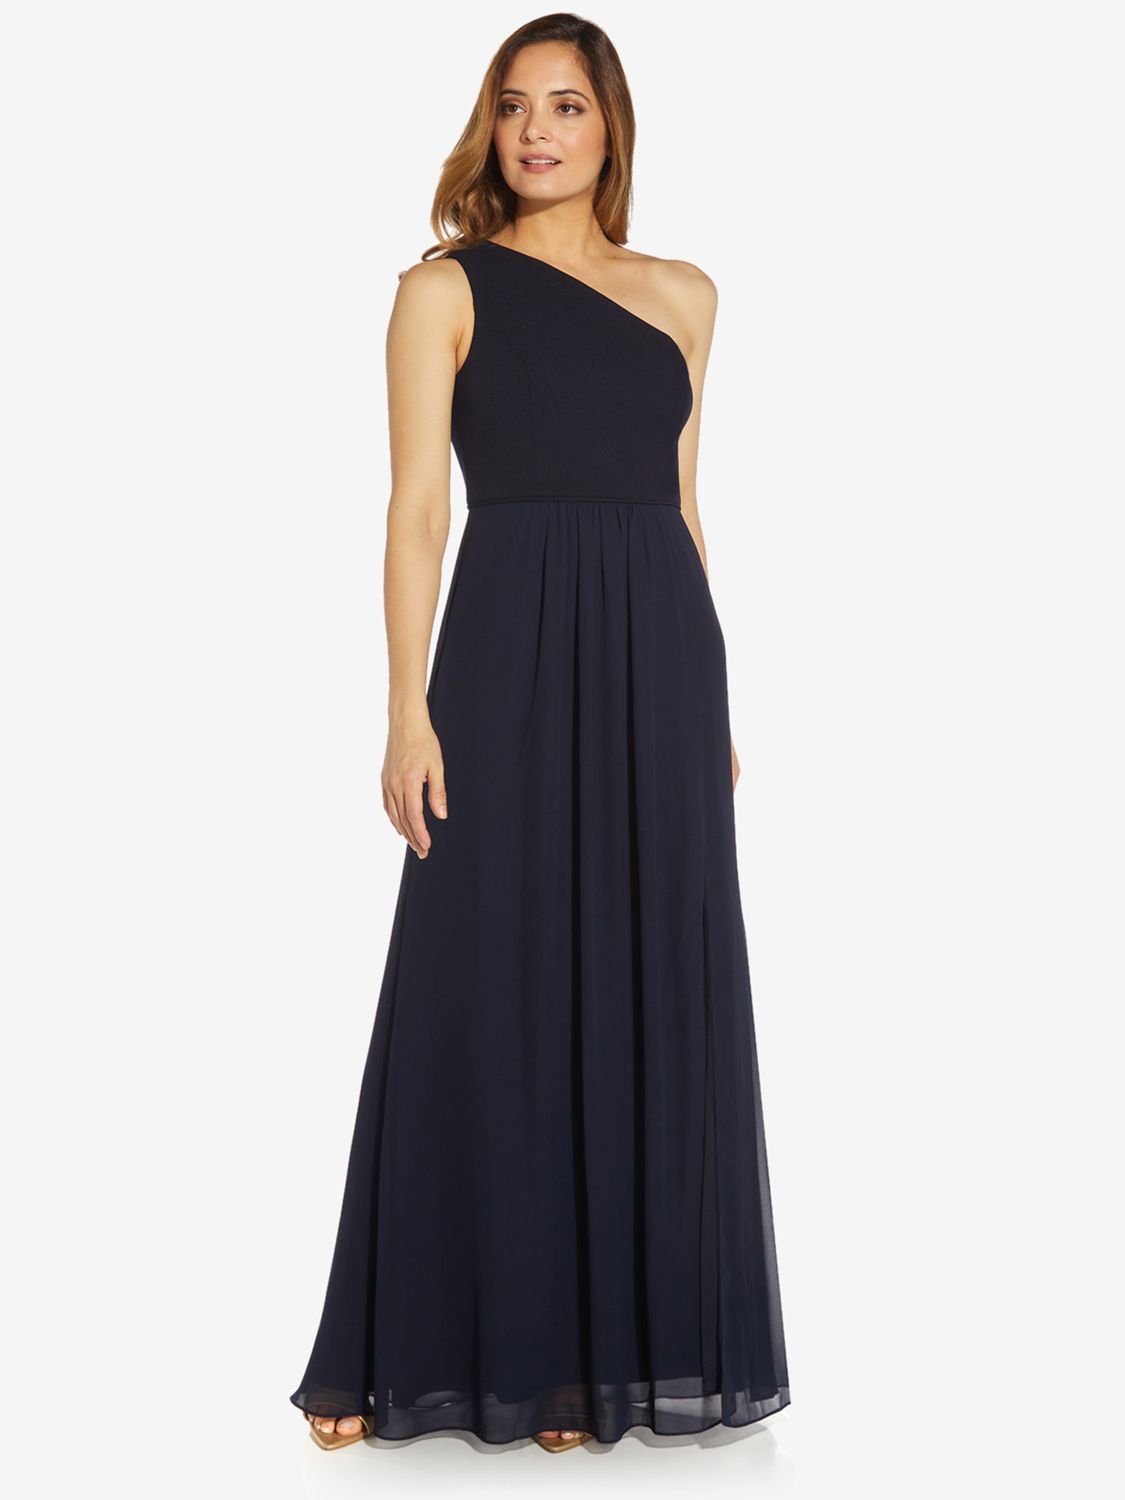 Adrianna Papell One Shoulder Chiffon Gown, Midnight, 6